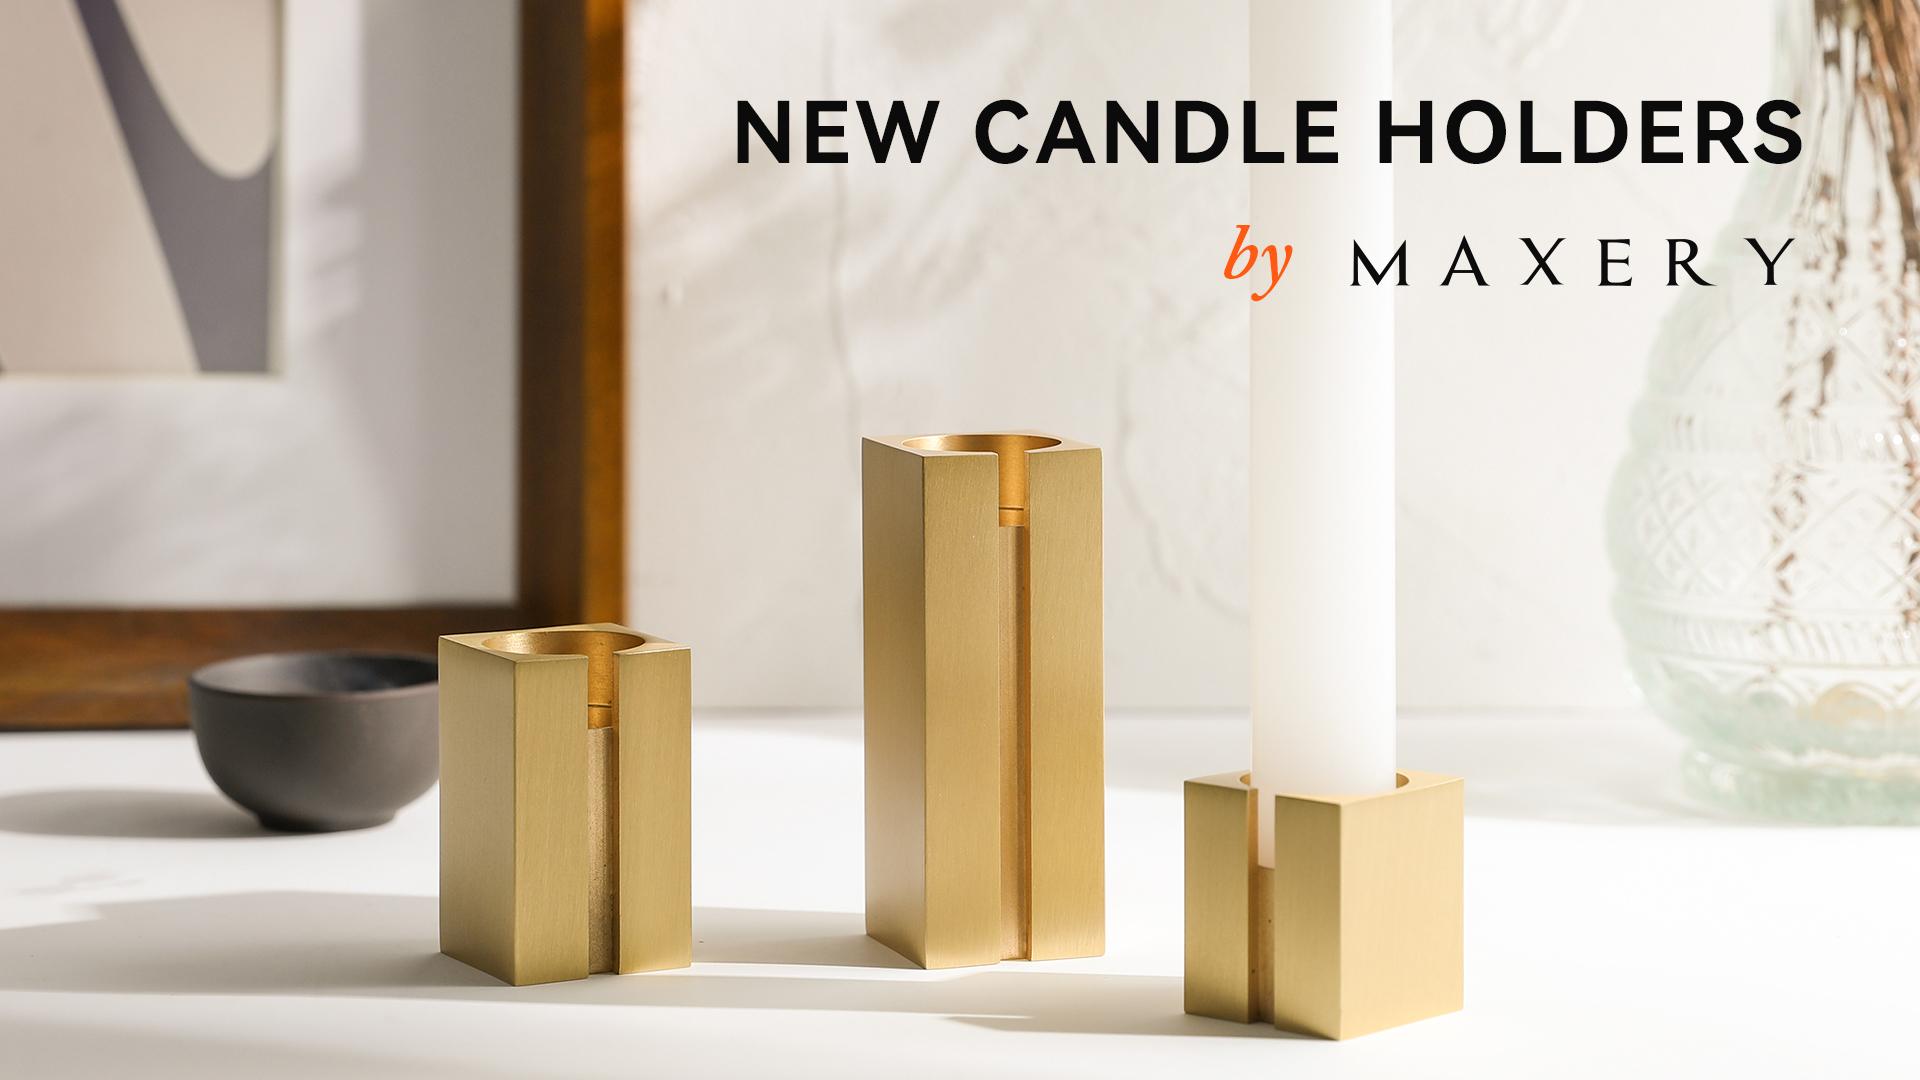 Maxery New Candle Holder sets